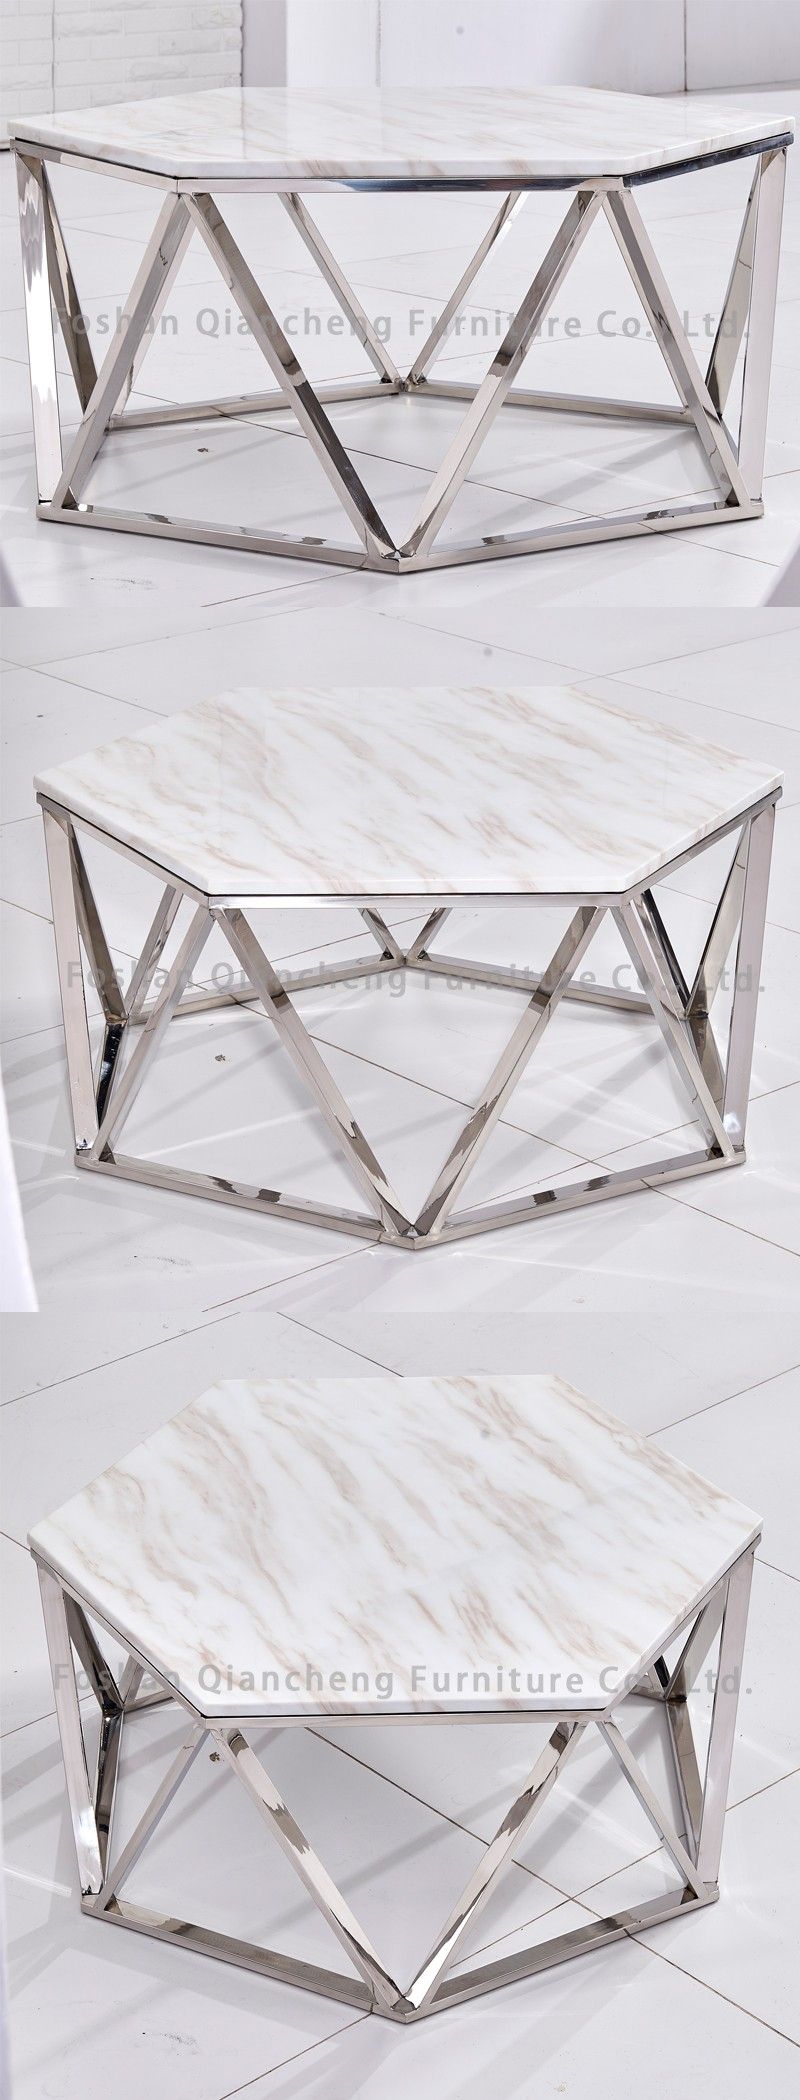 Hexagon White Marble Top Coffee Table For Living Room With White Grained Wood Hexagonal Coffee Tables (View 10 of 15)